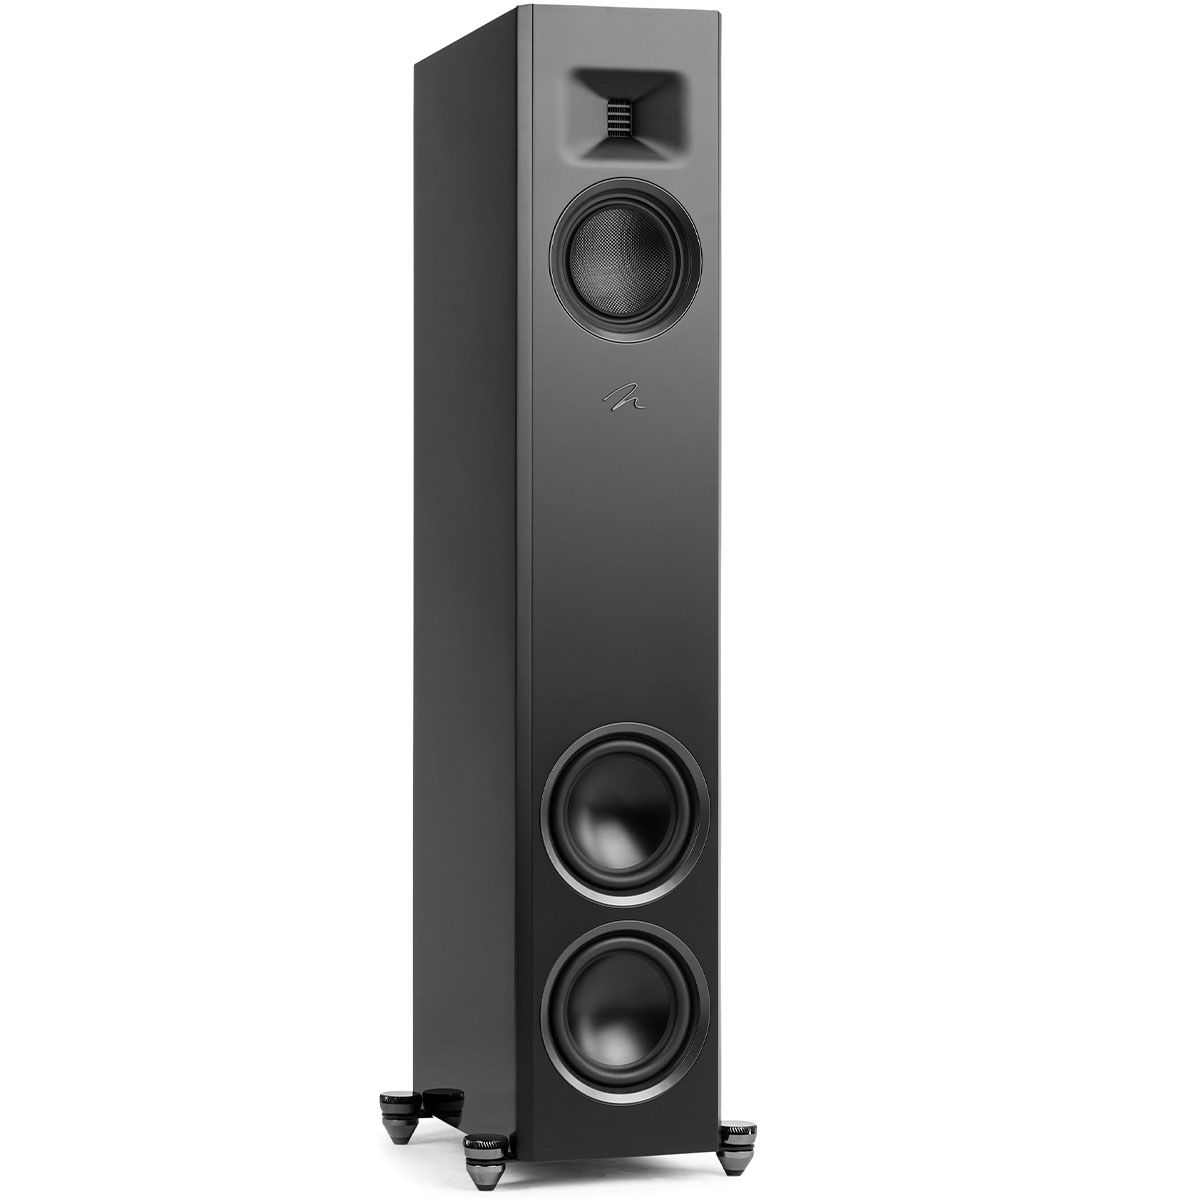 MartinLogan Motion XT F20  Floorstanding Speaker in black, angled view without grilles on white background